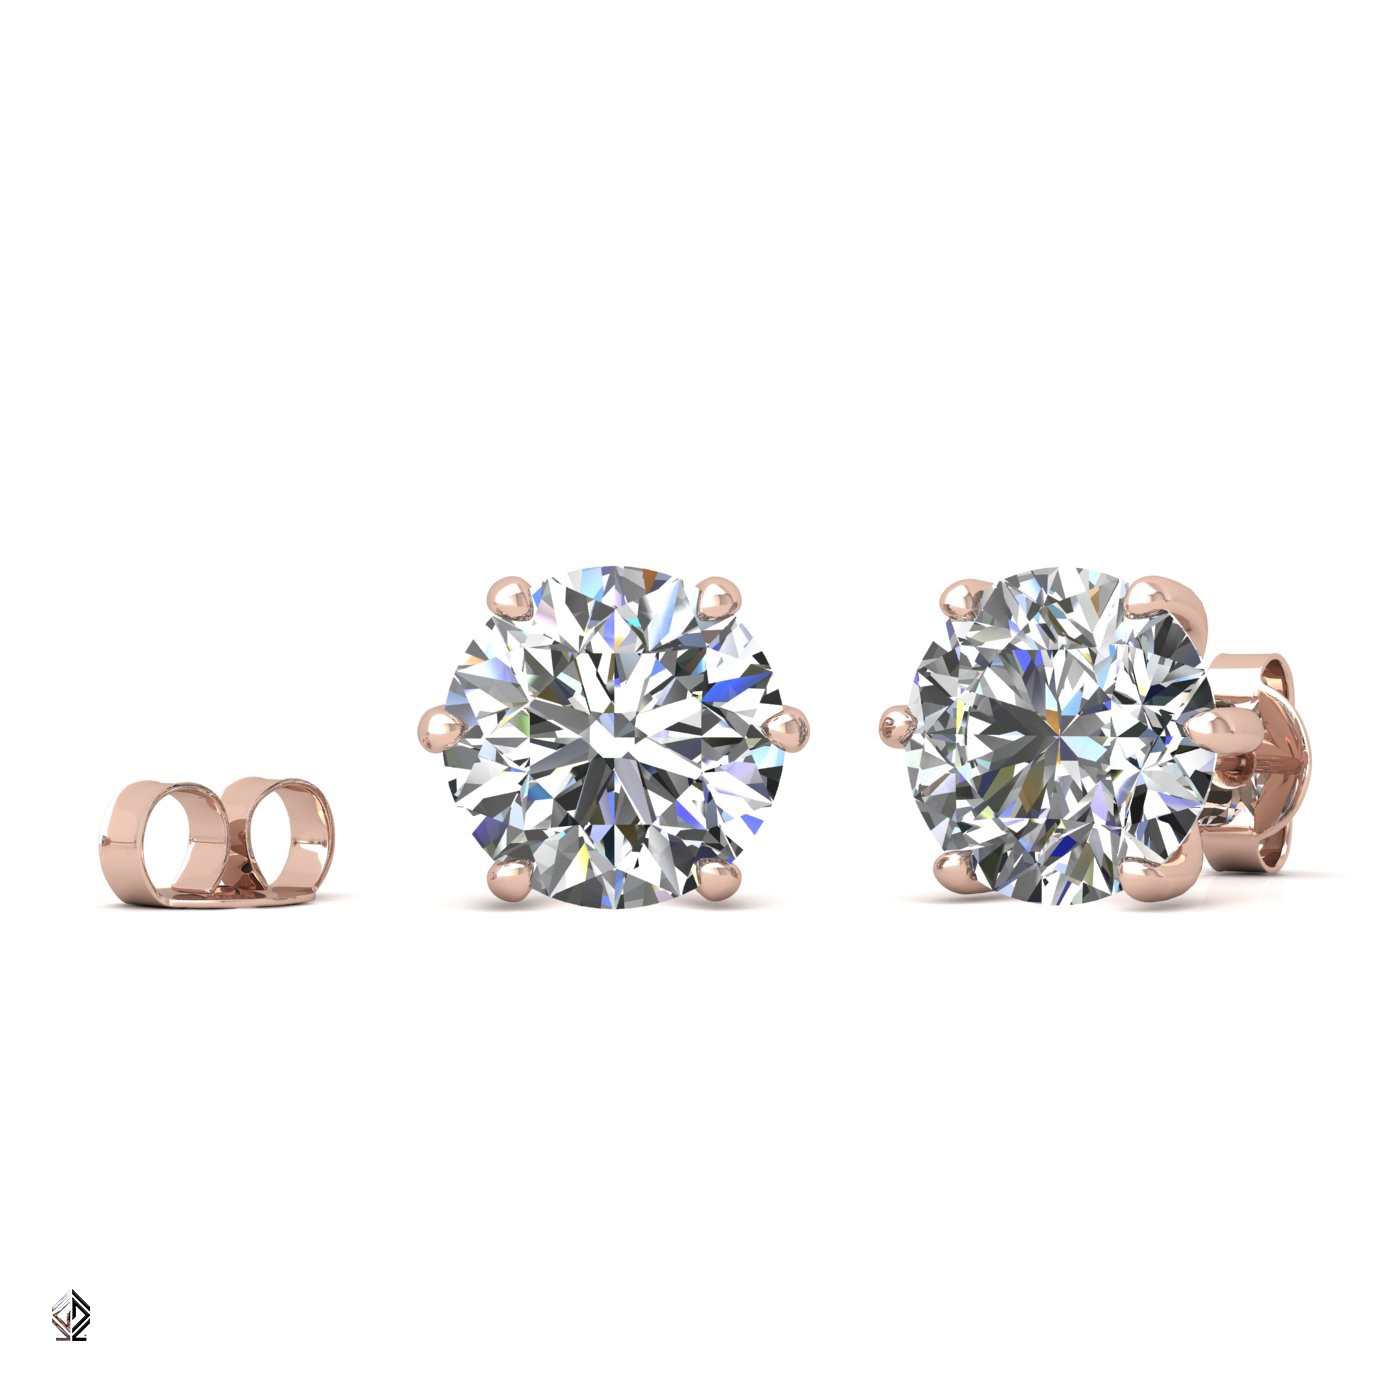 18k rose gold 0,3 ct each (0,6 tcw) 6 prongs round shape diamond earrings Photos & images